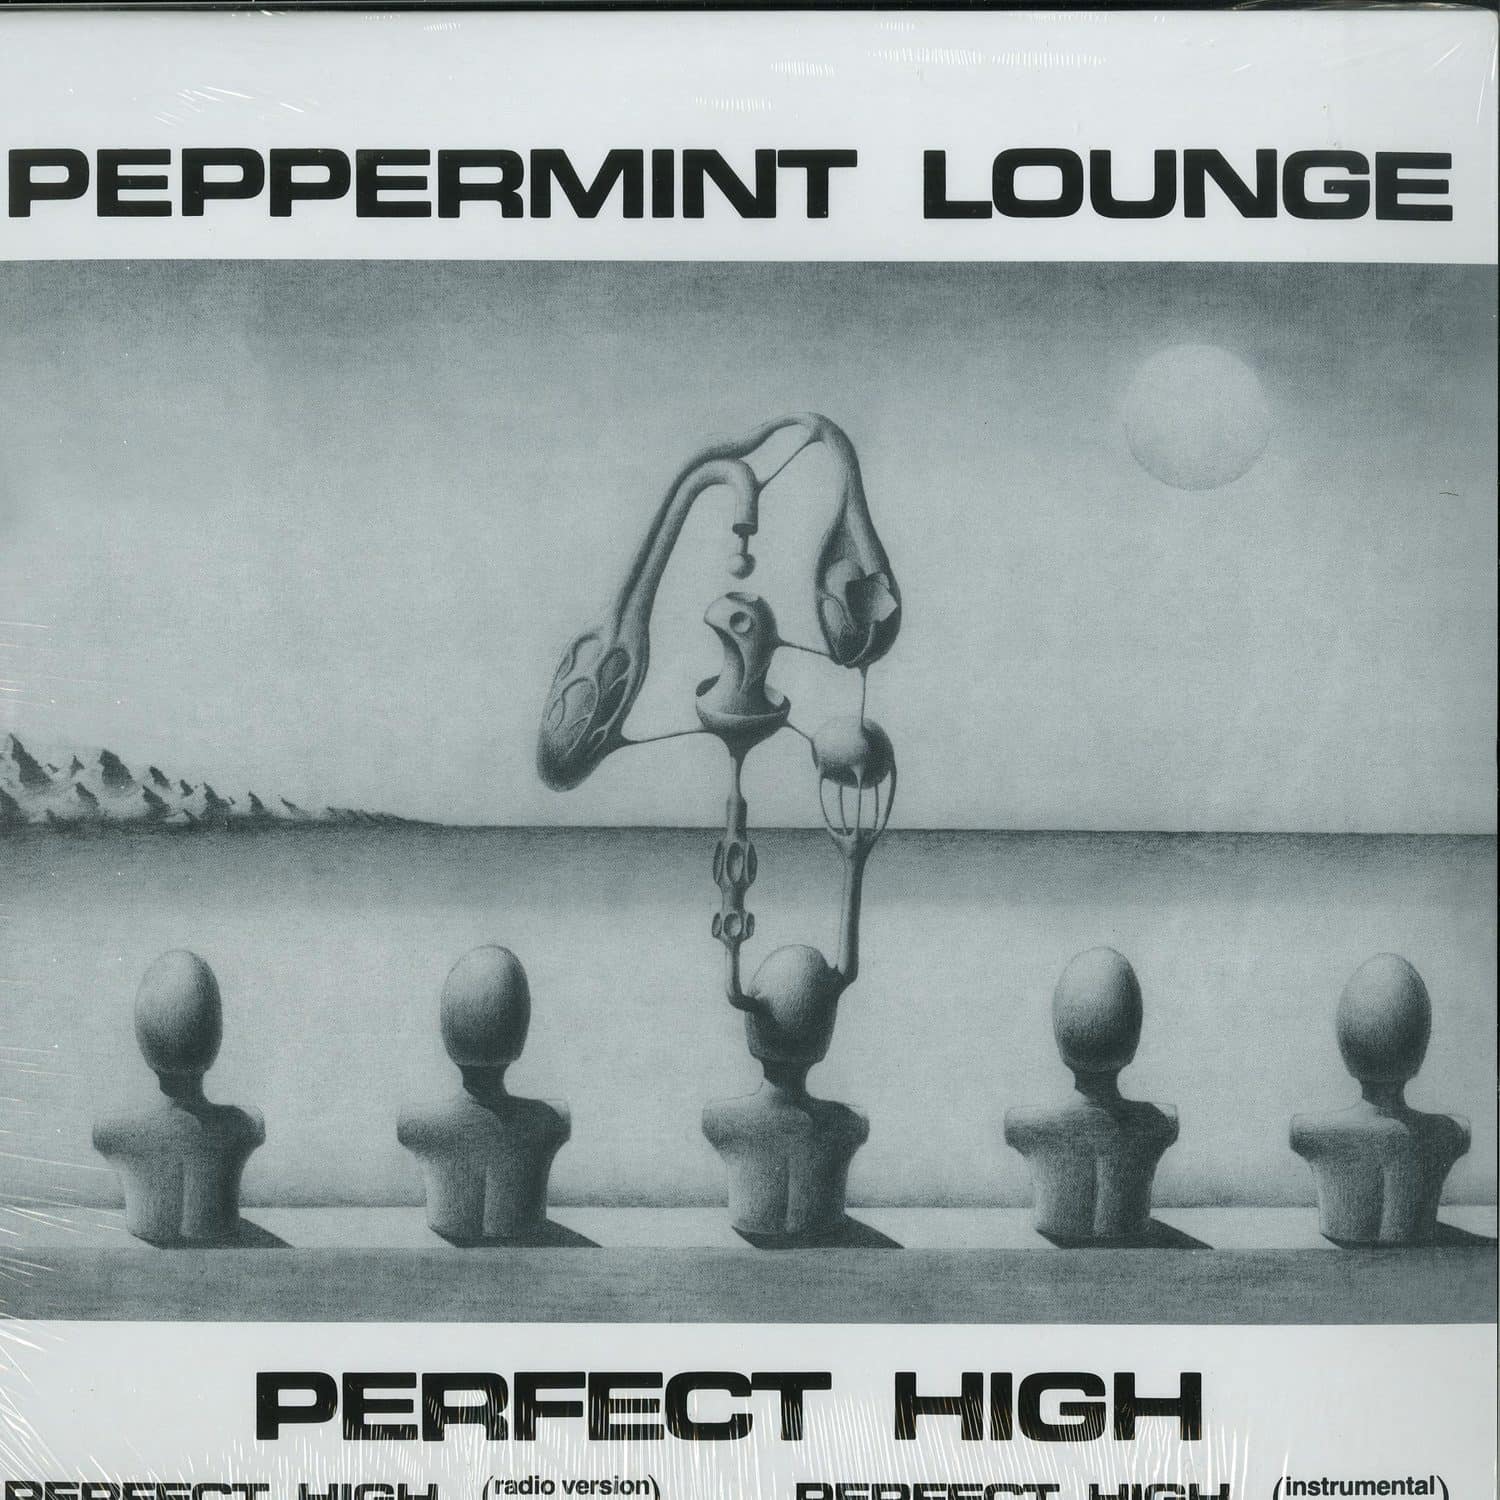 Peppermint Lounge - PERFECT HIGH